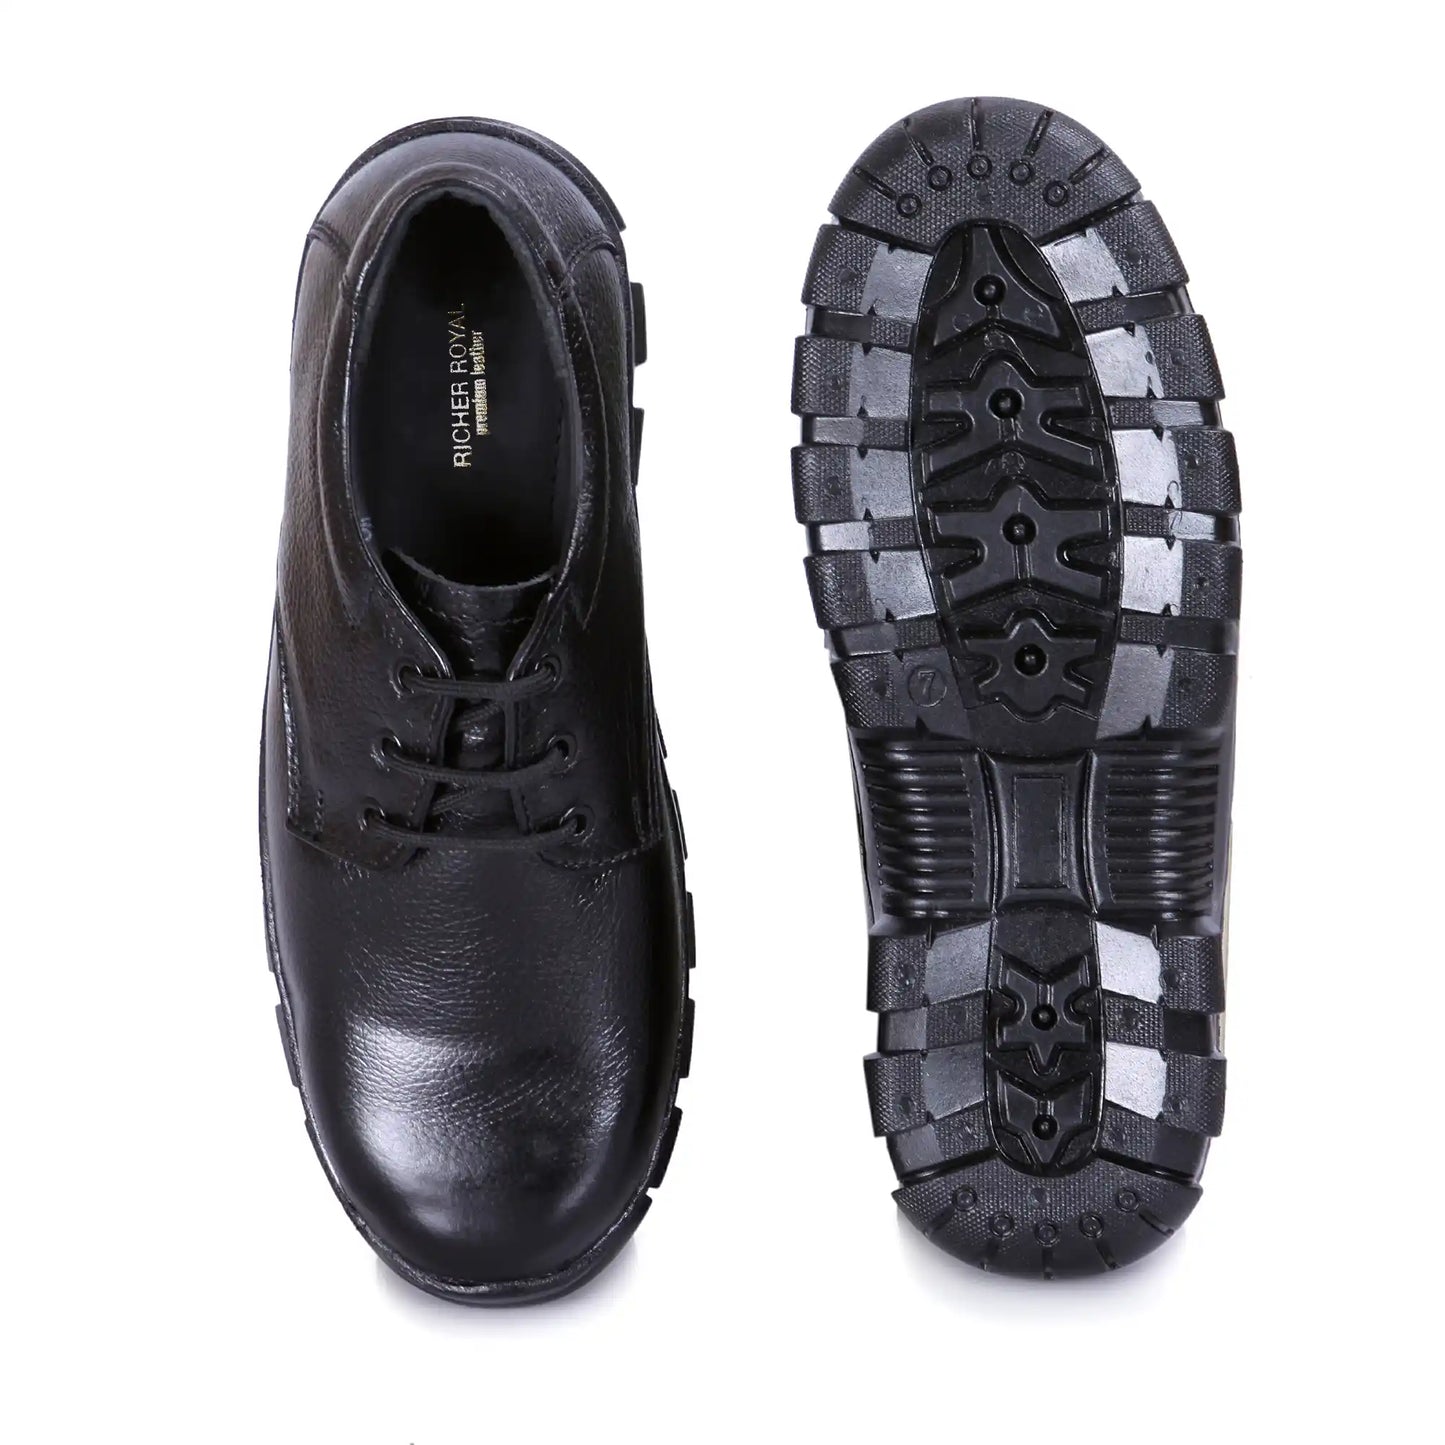 Men Industrial Lace Up Pure Leather Safety Shoes